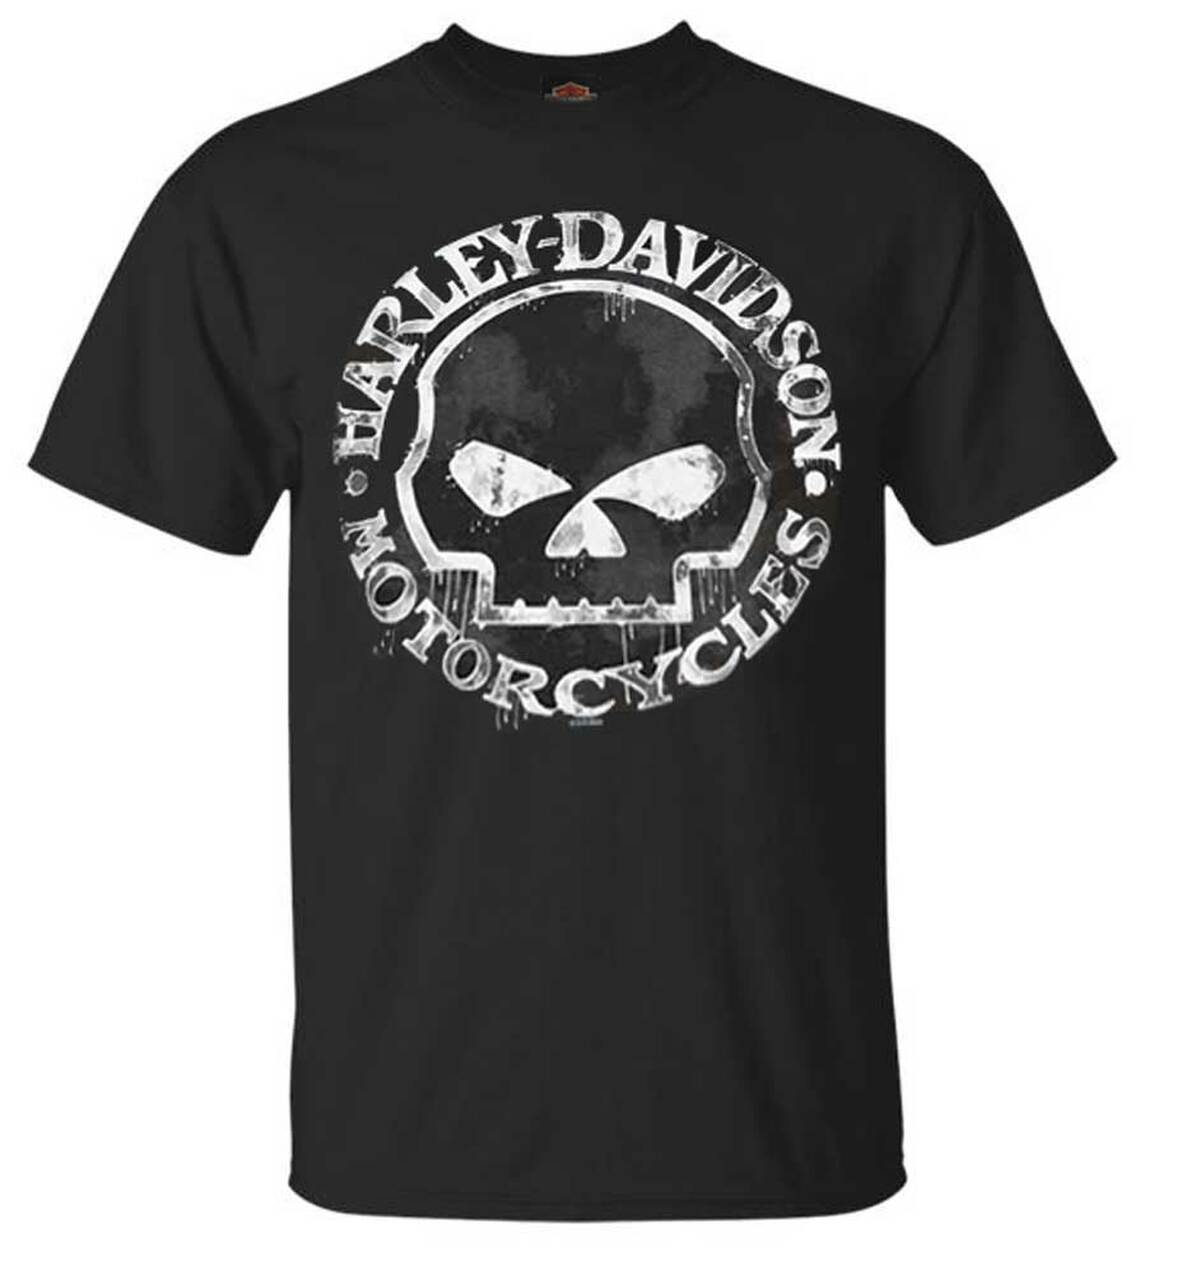 Harley Davidson Willie G Davidson Motorcycles Gifts For Rider Classic T Shirt